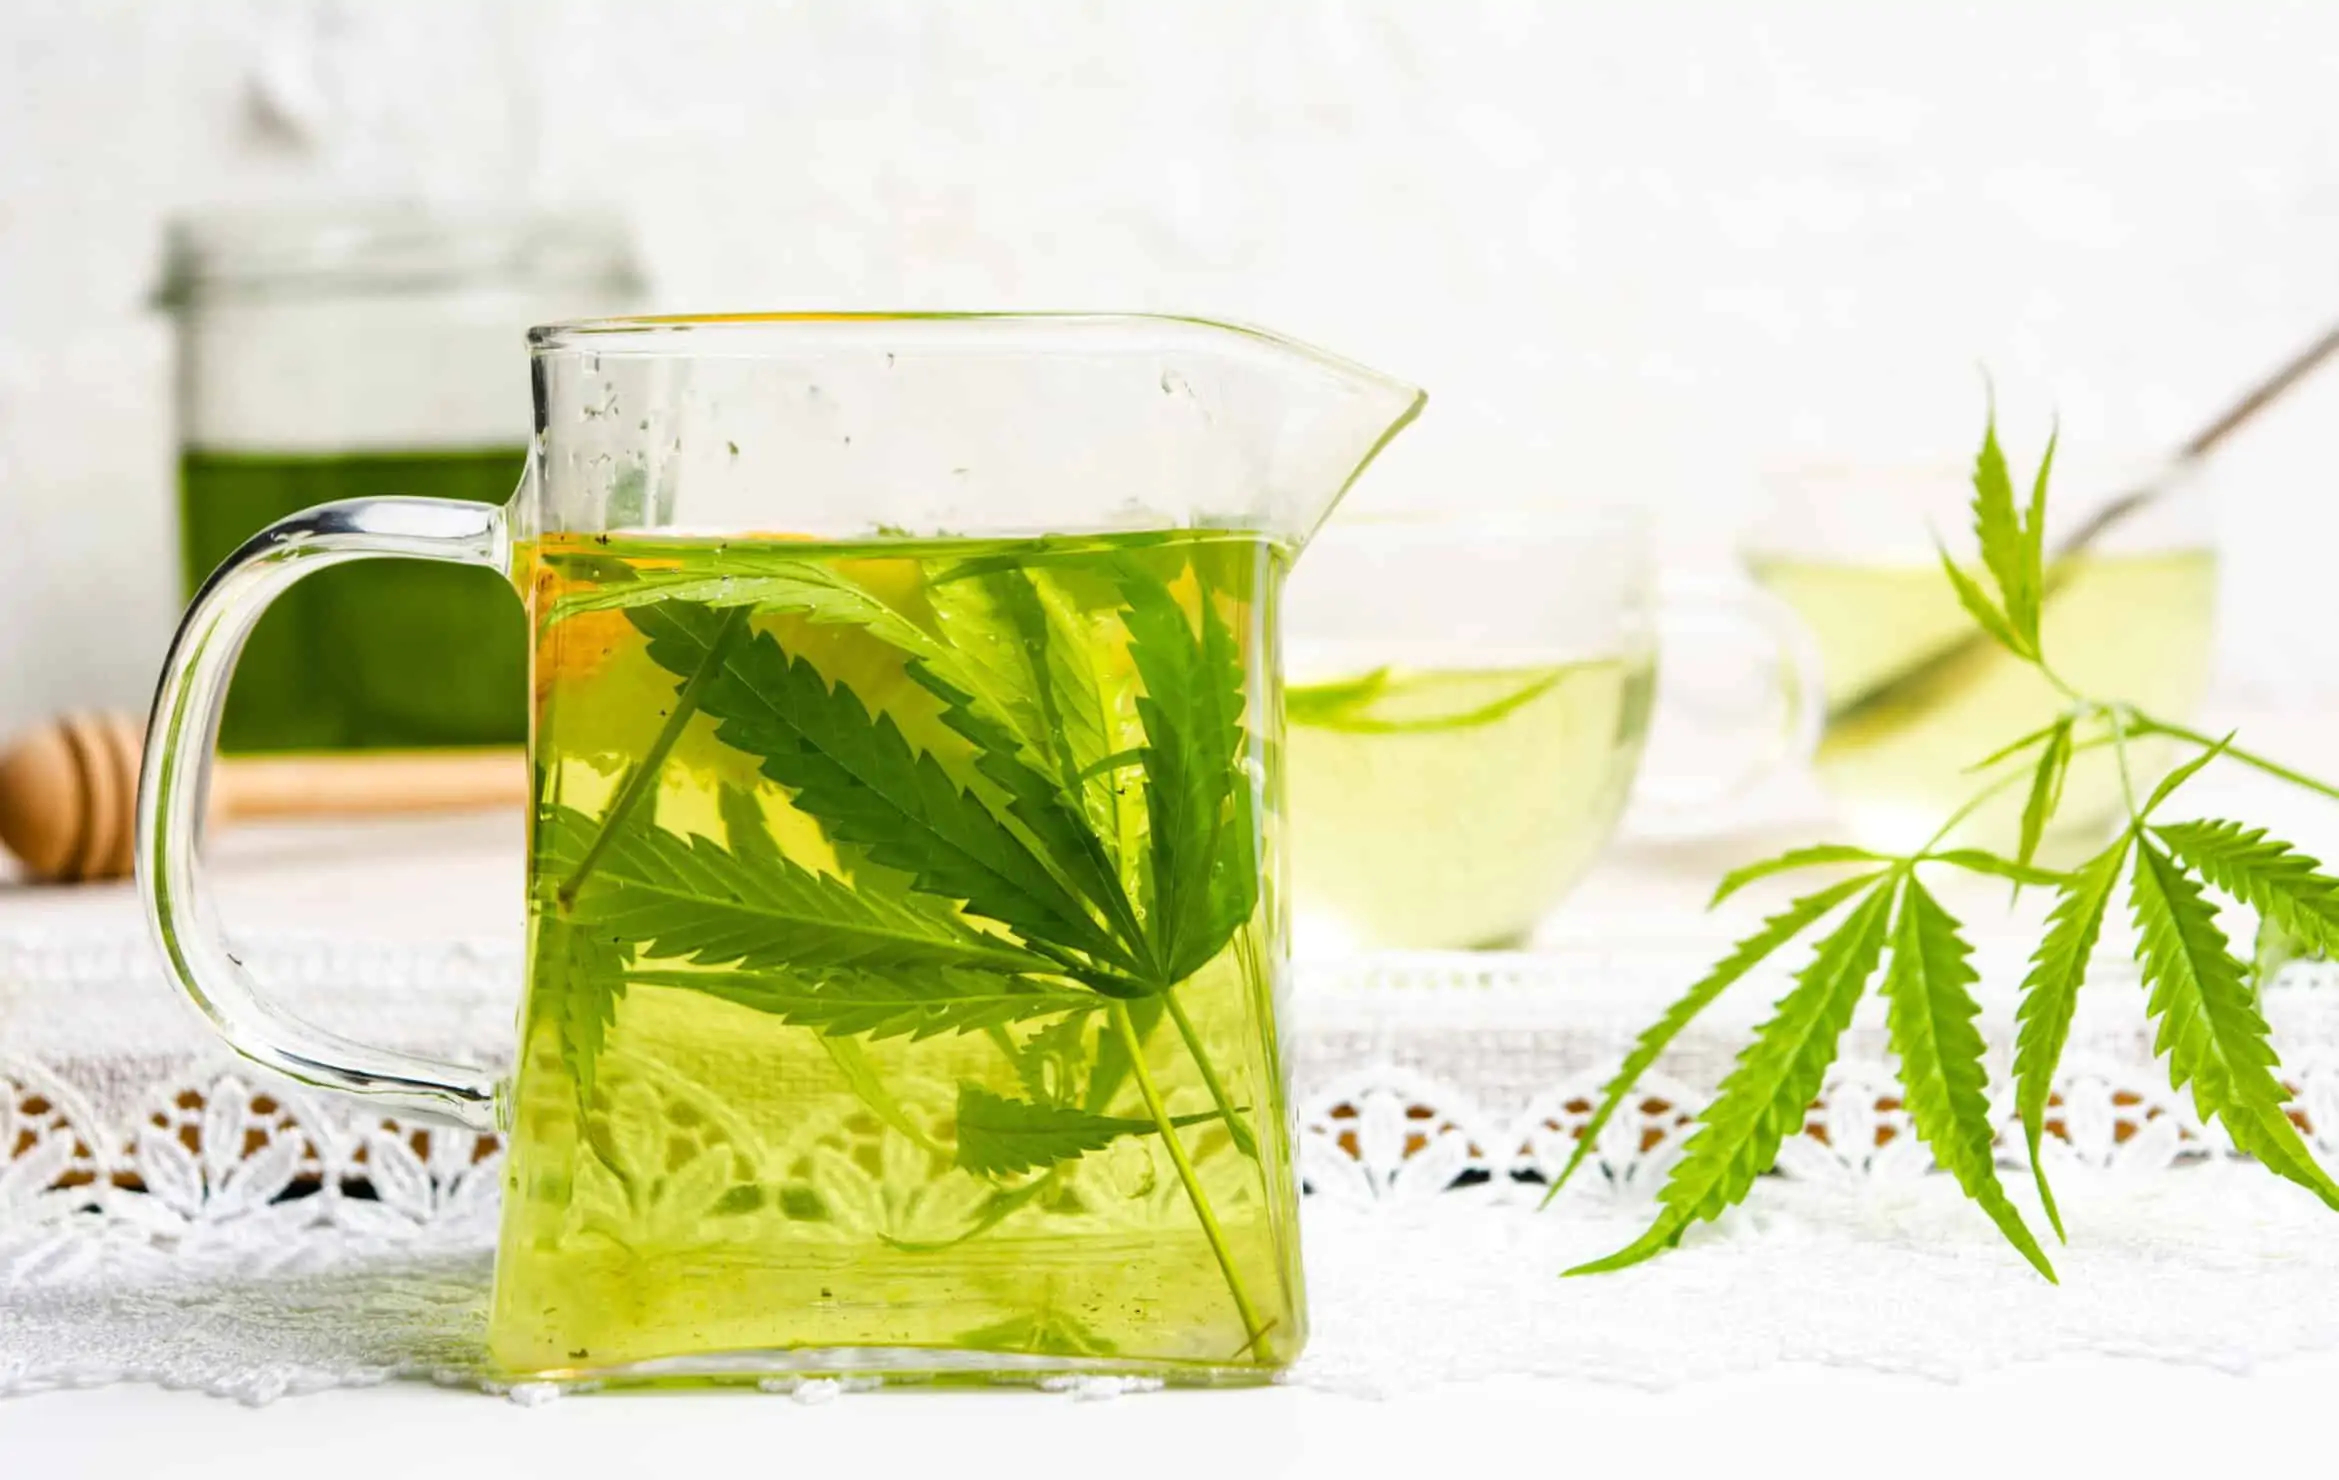 How Cannabis & Other Healthy Herbs May Help With Weight Loss